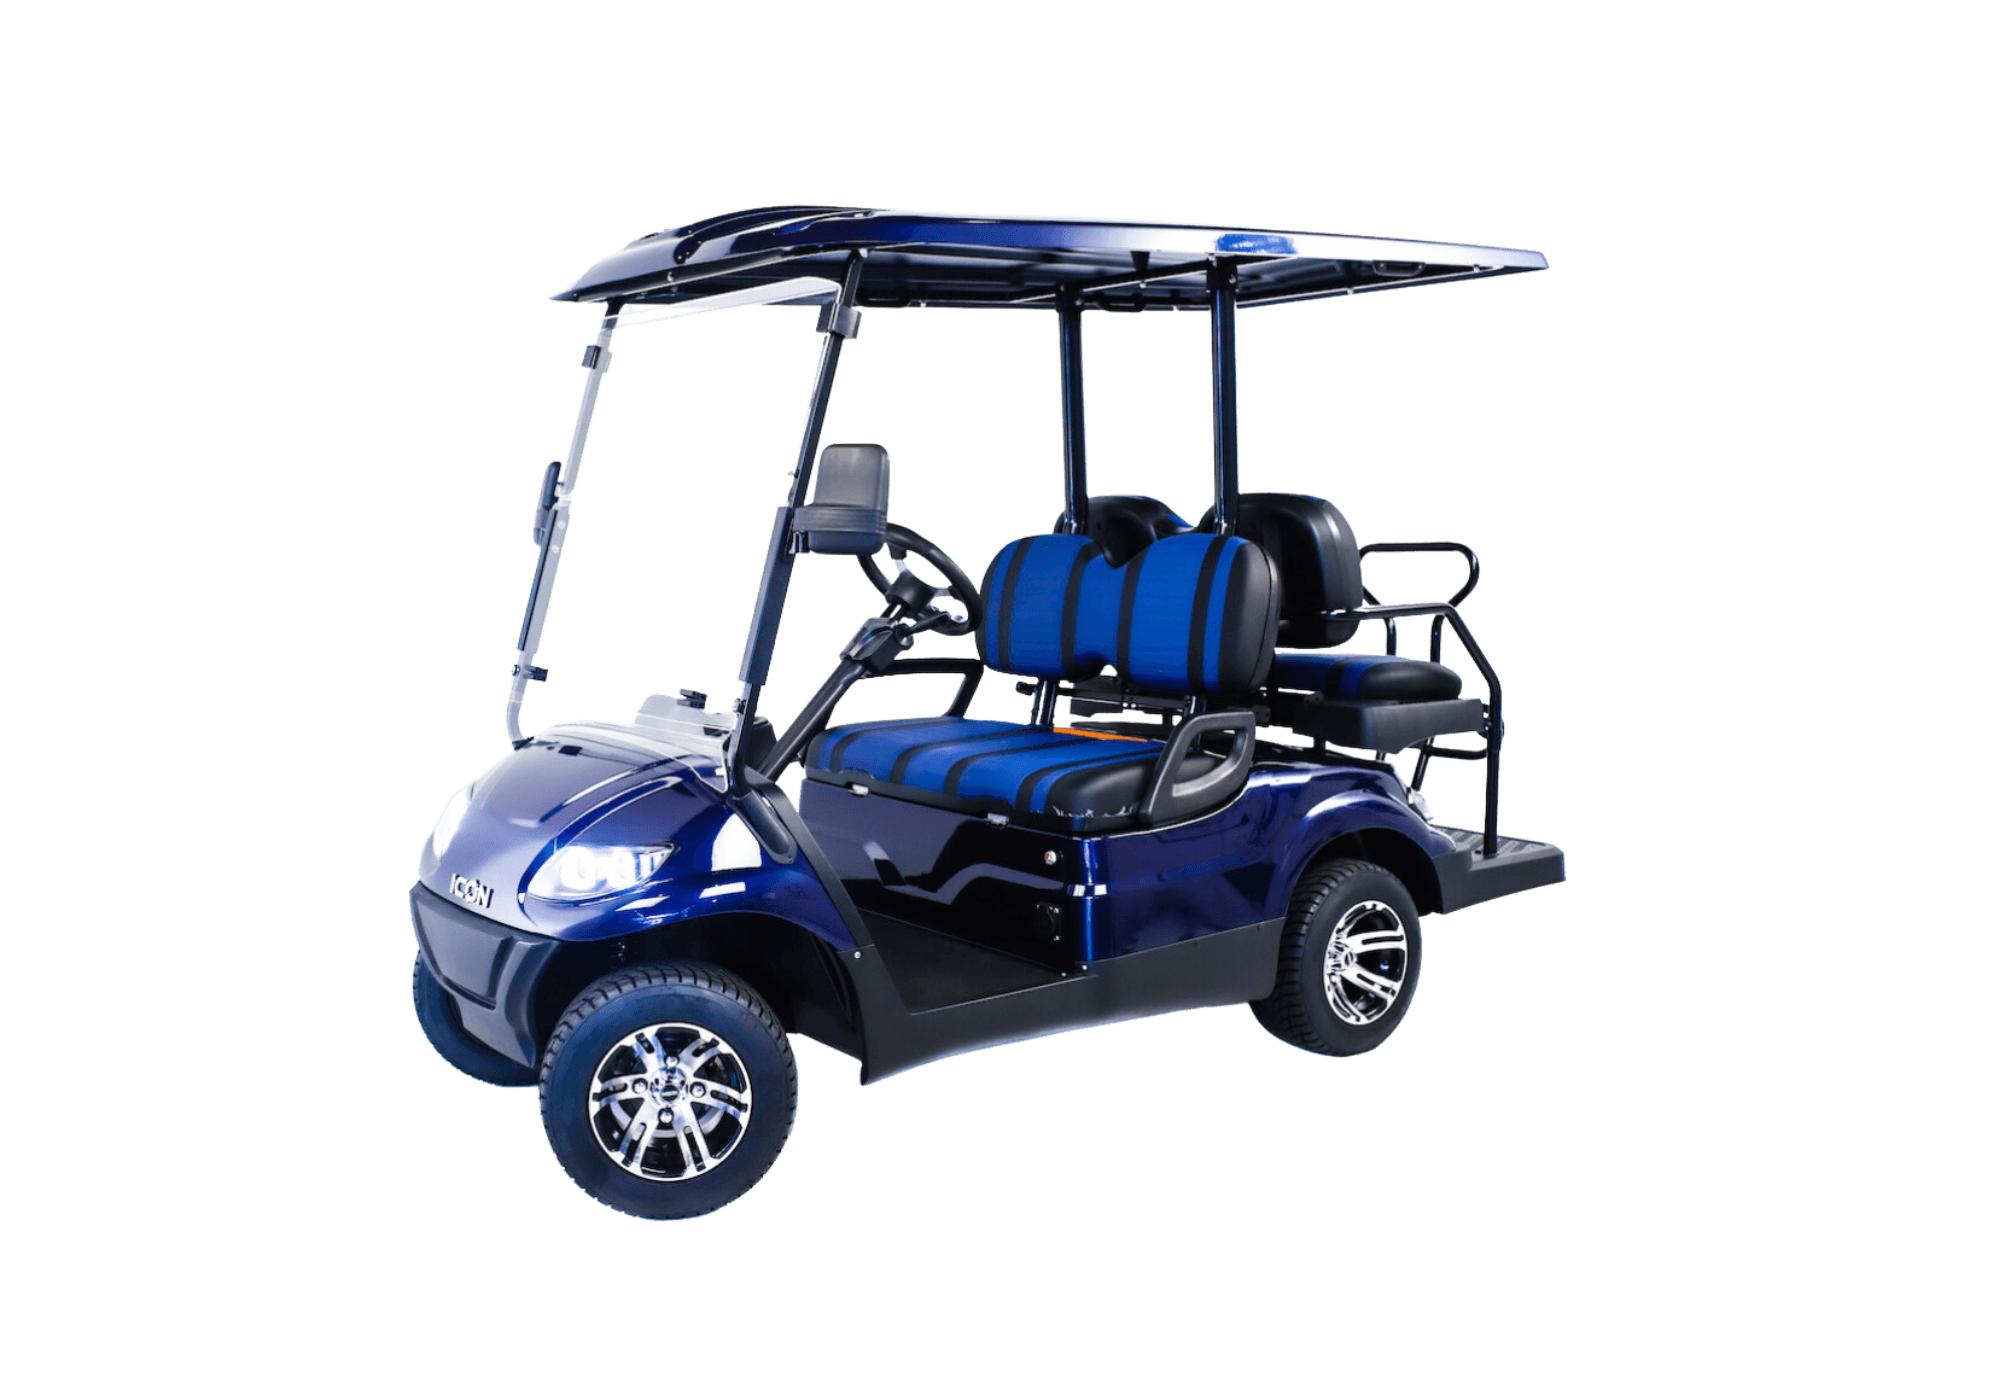 The i40 is one of the top golf carts